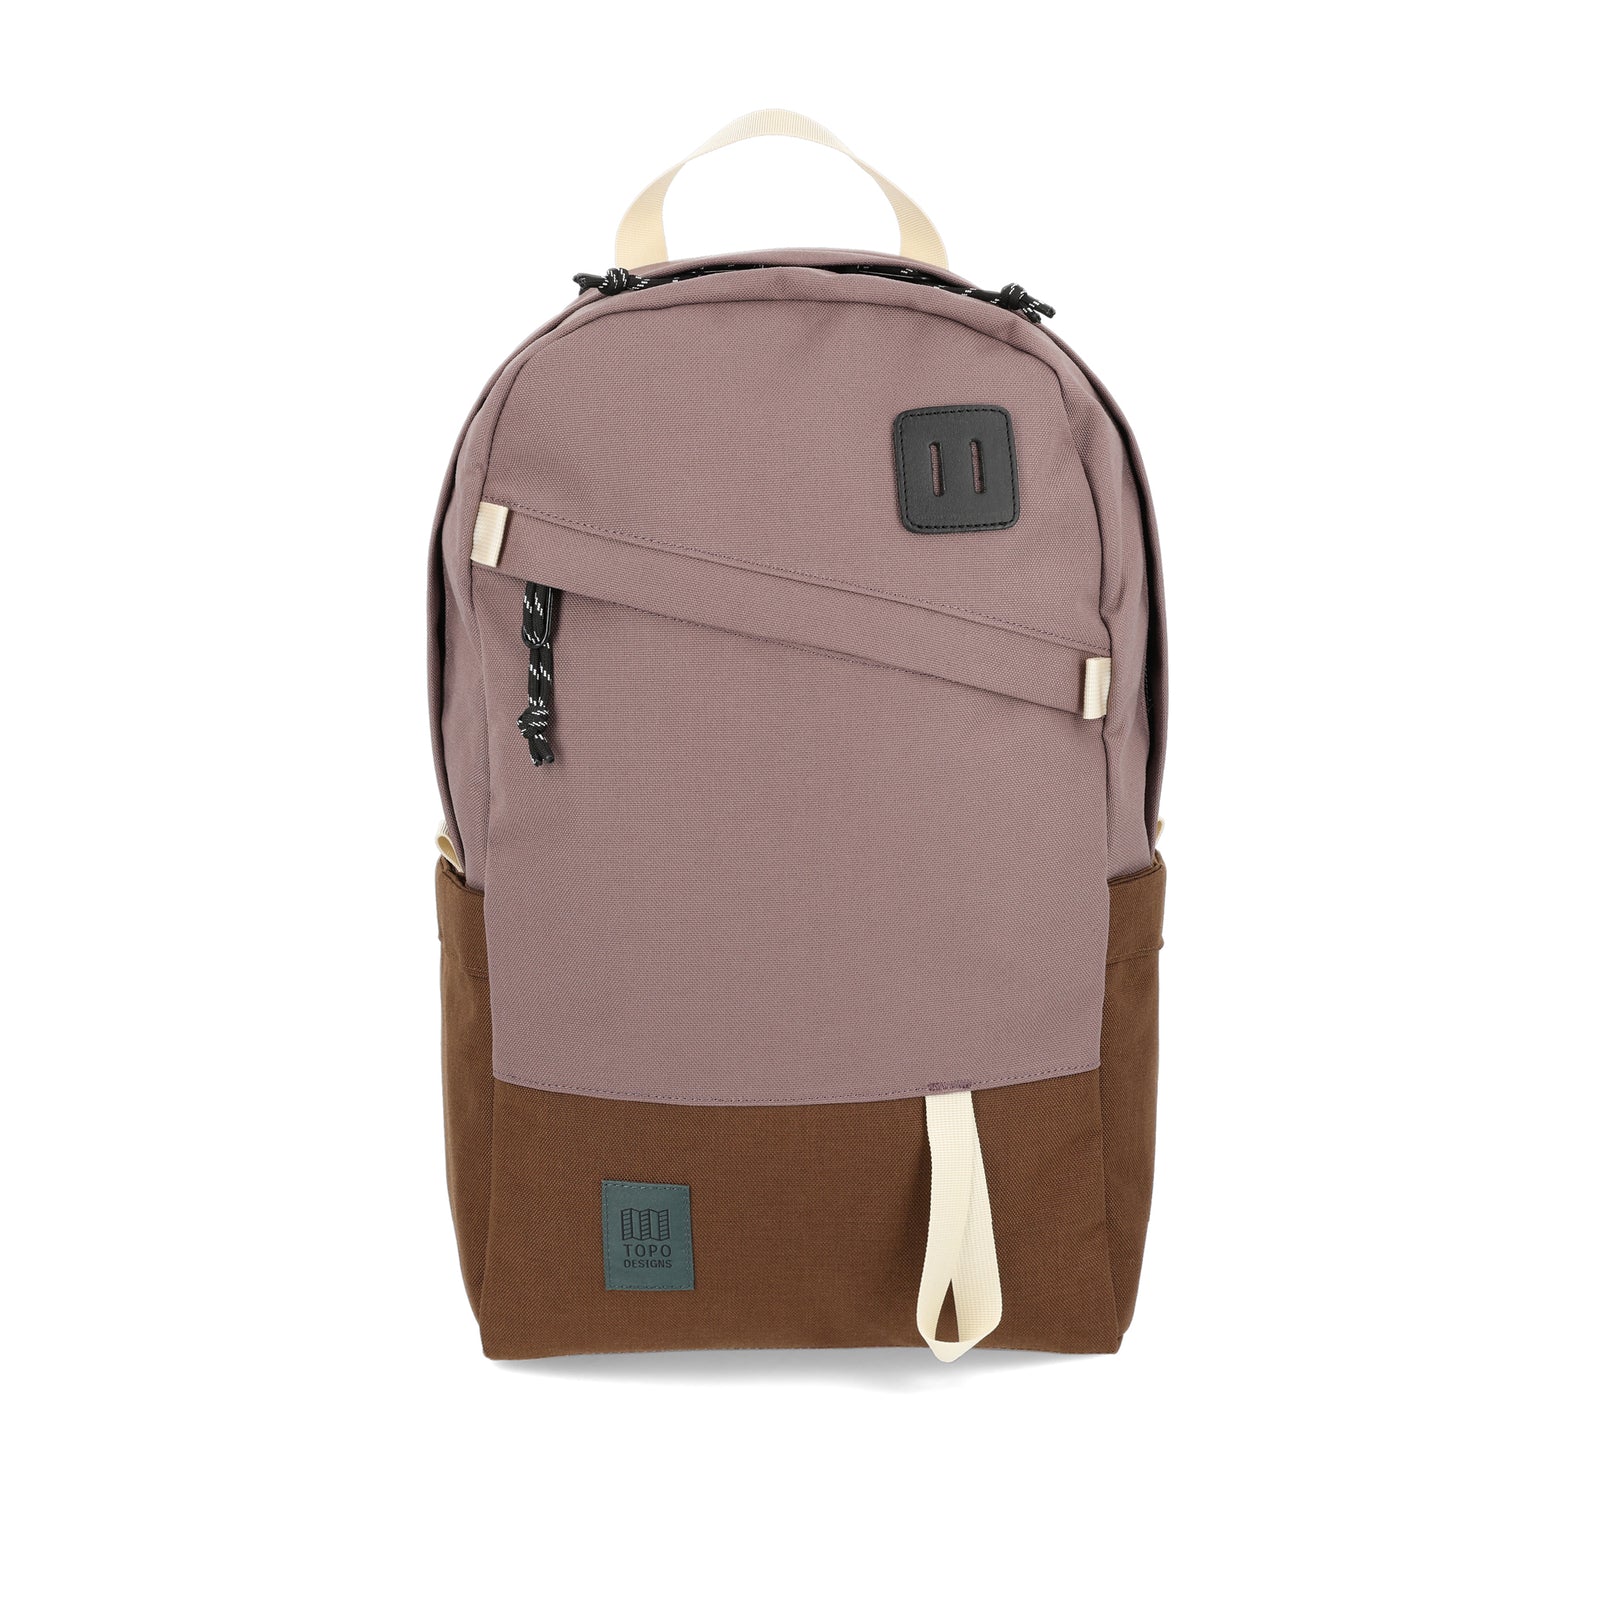 Topo Designs Daypack Classic 100% recycled nylon laptop backpack for work or school in "Peppercorn / Cocoa" purple brown